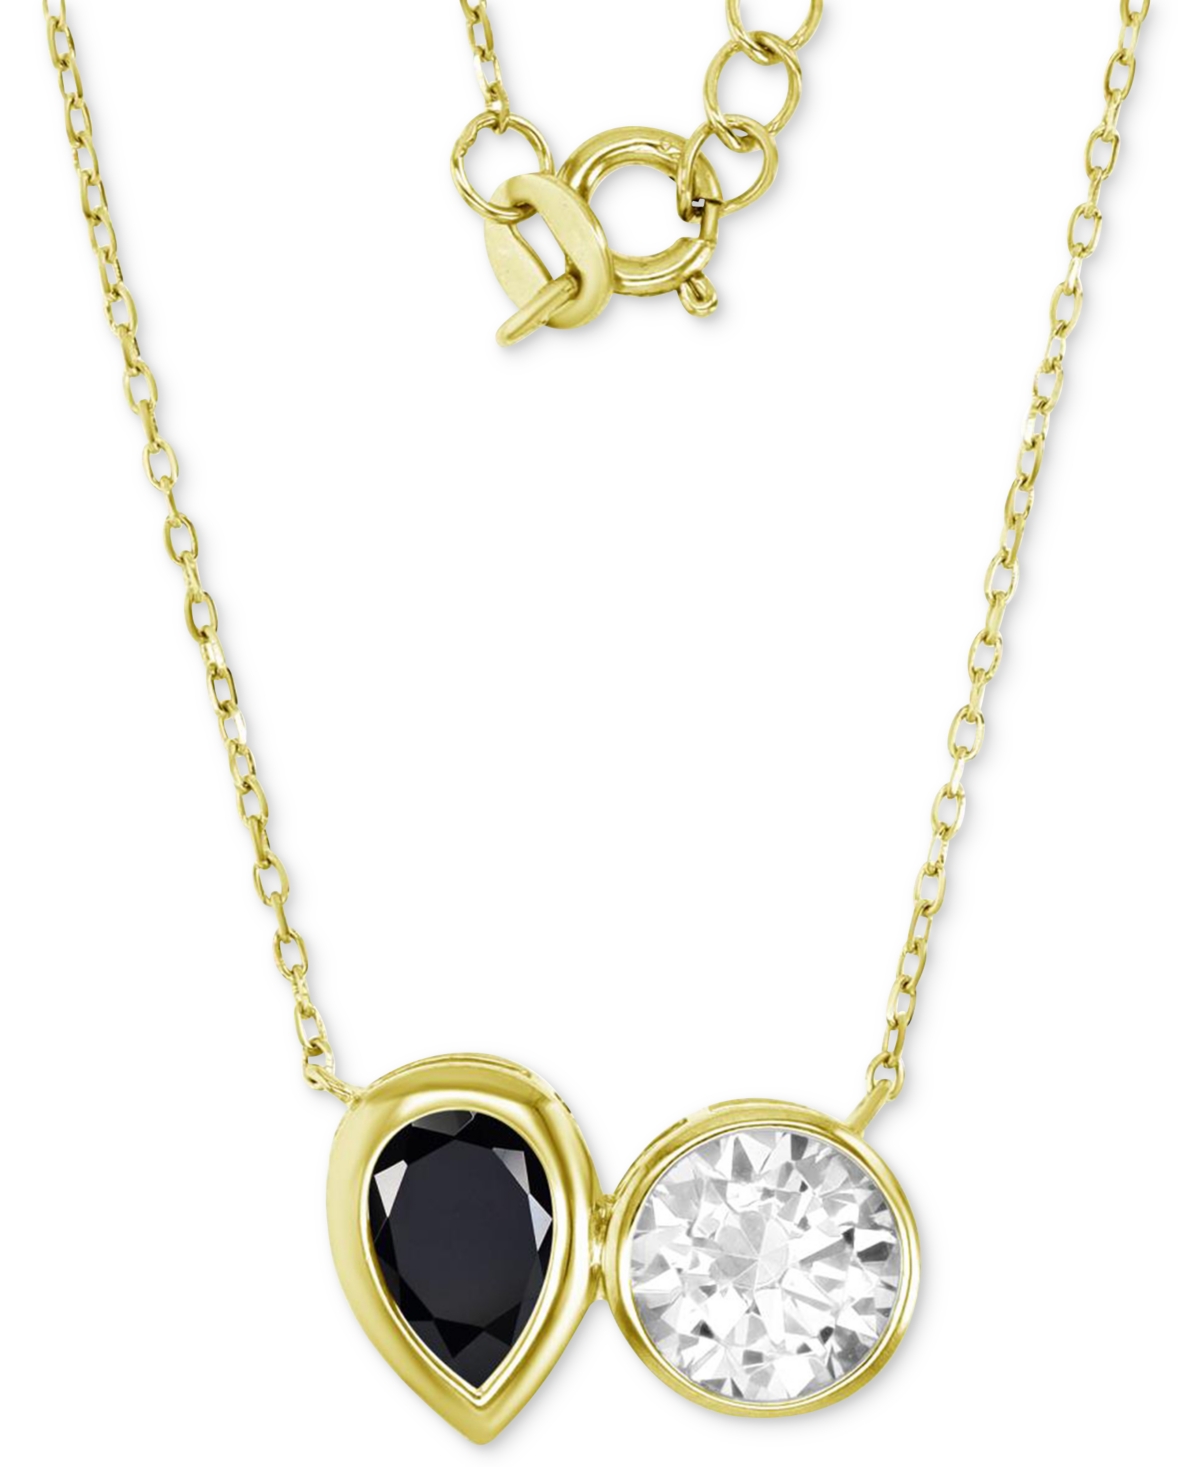 Cubic Zirconia White & Black Two-Stone Necklace in 14k Gold-Plated Sterling Silver, 18" + 2" extender - Gold